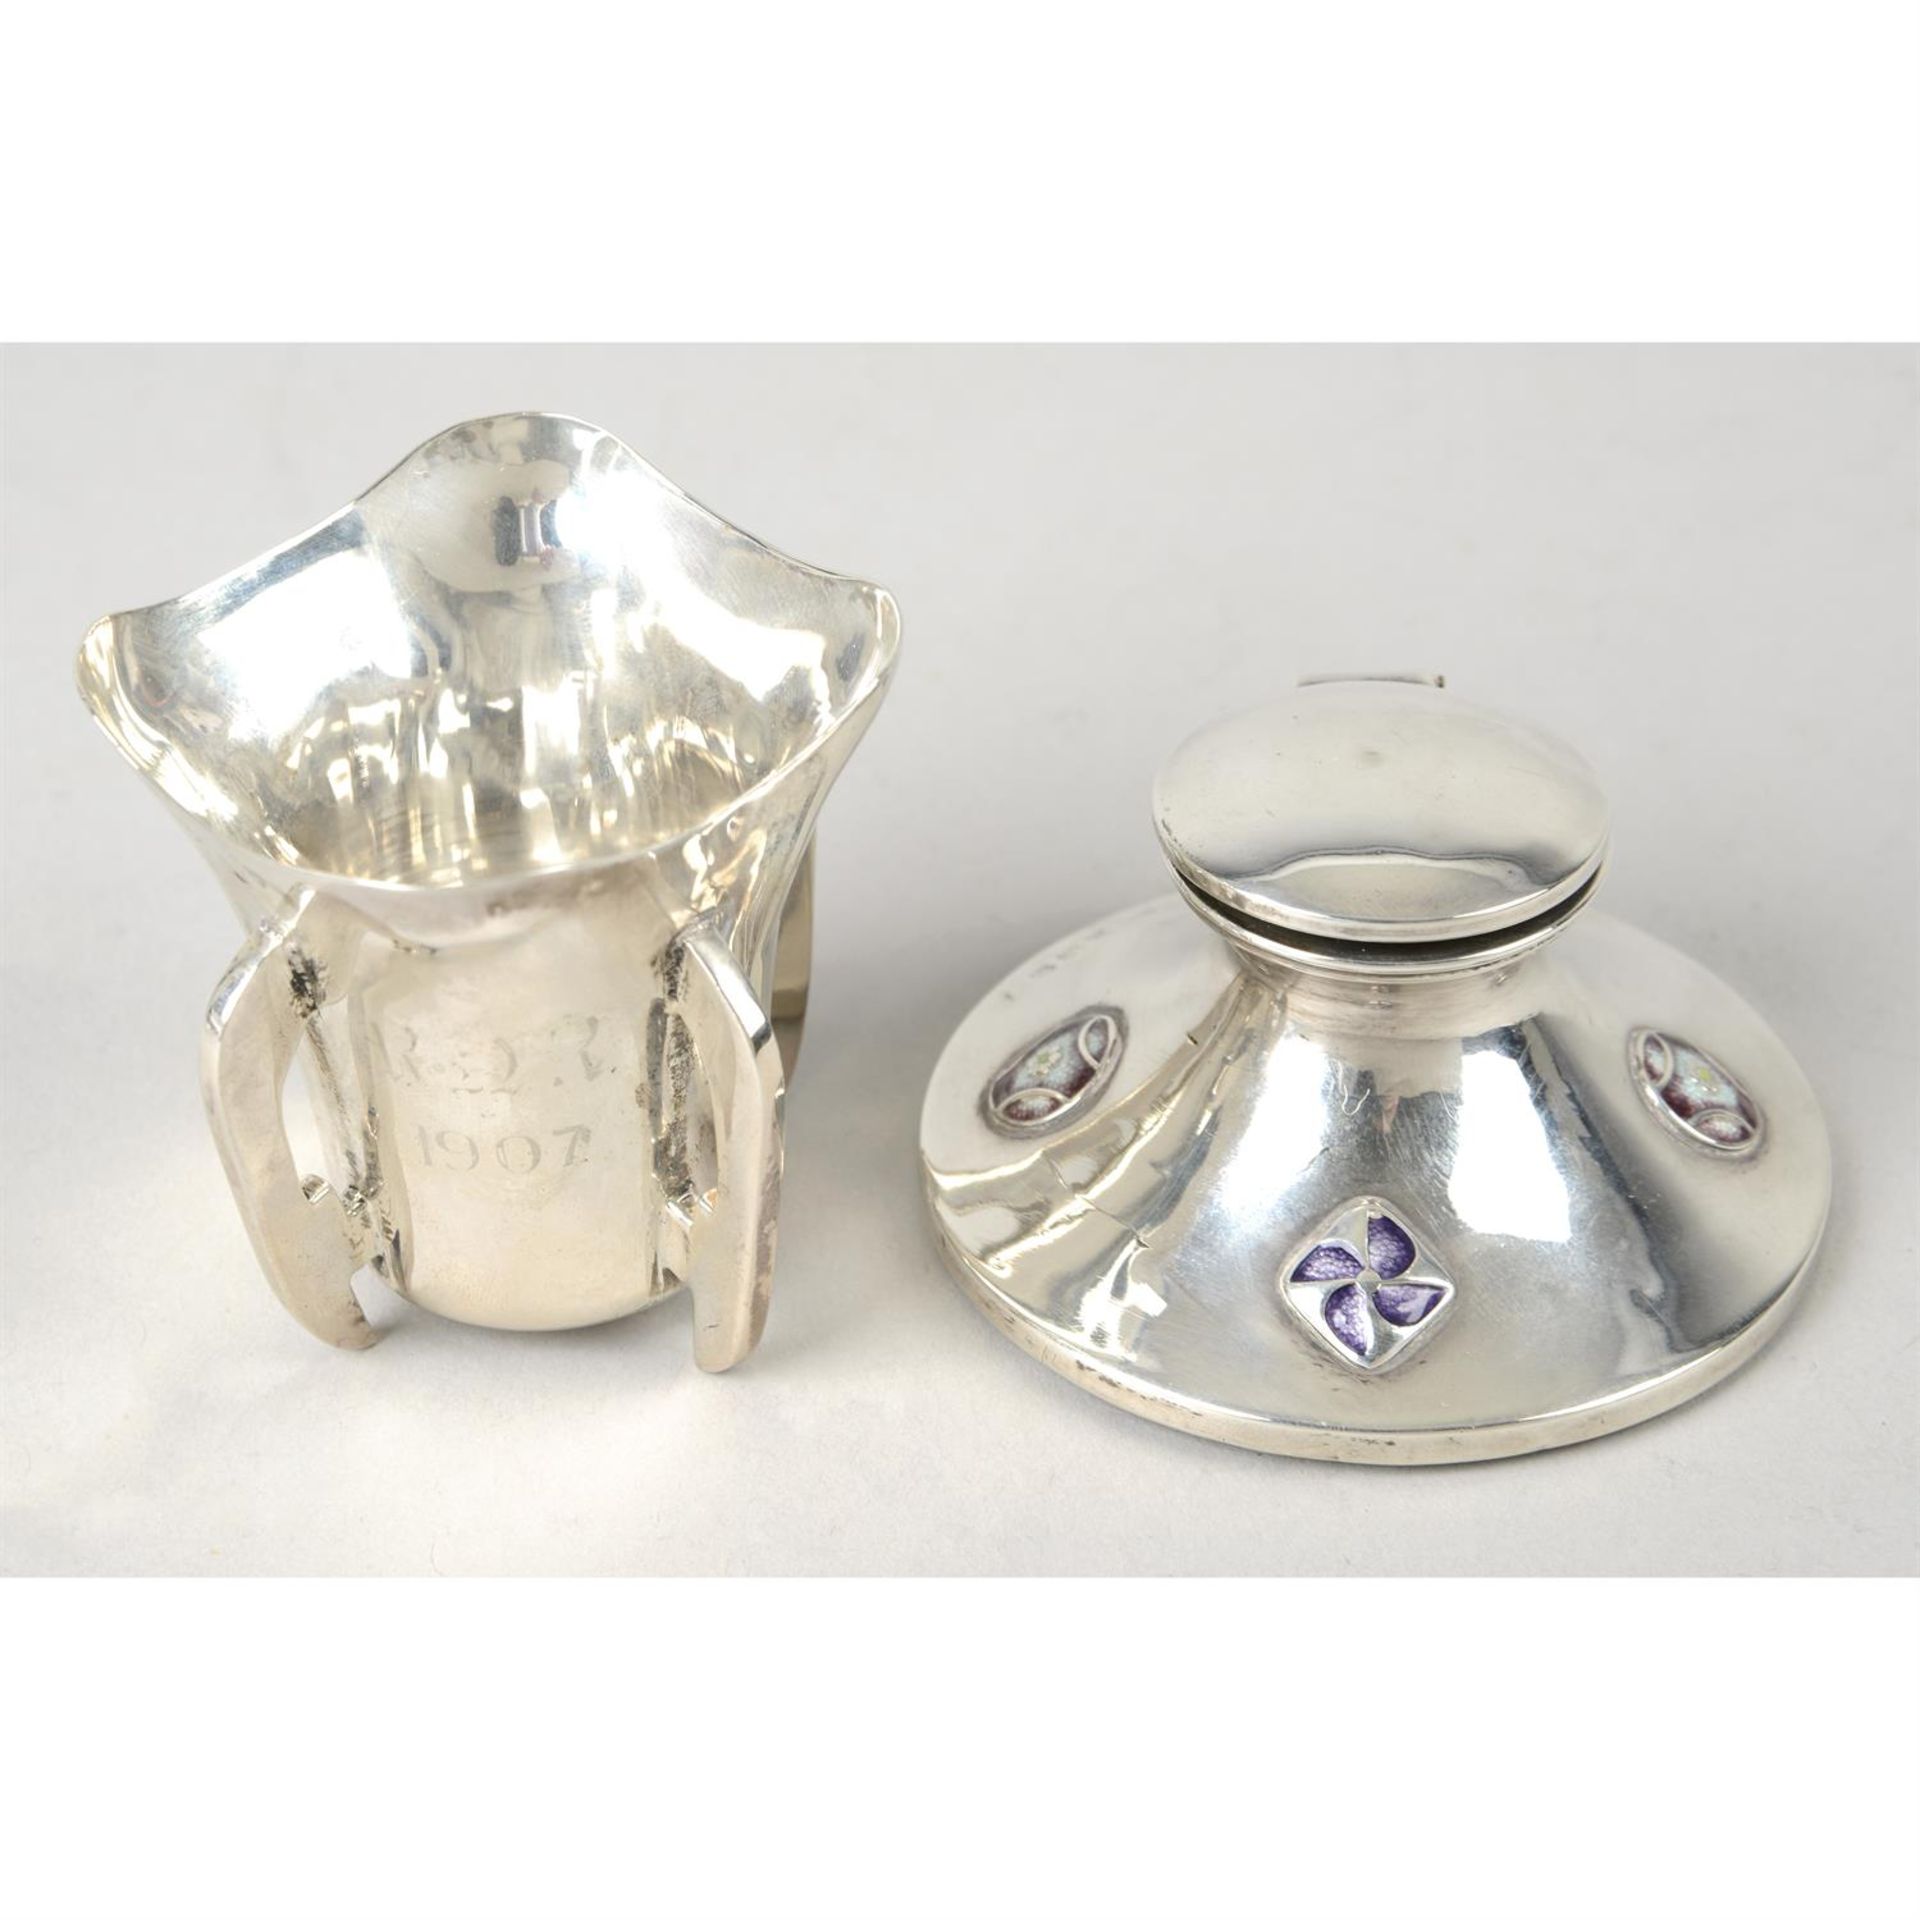 An Edwardian silver mounted inkwell; together with a small Irish silver pot. (2).